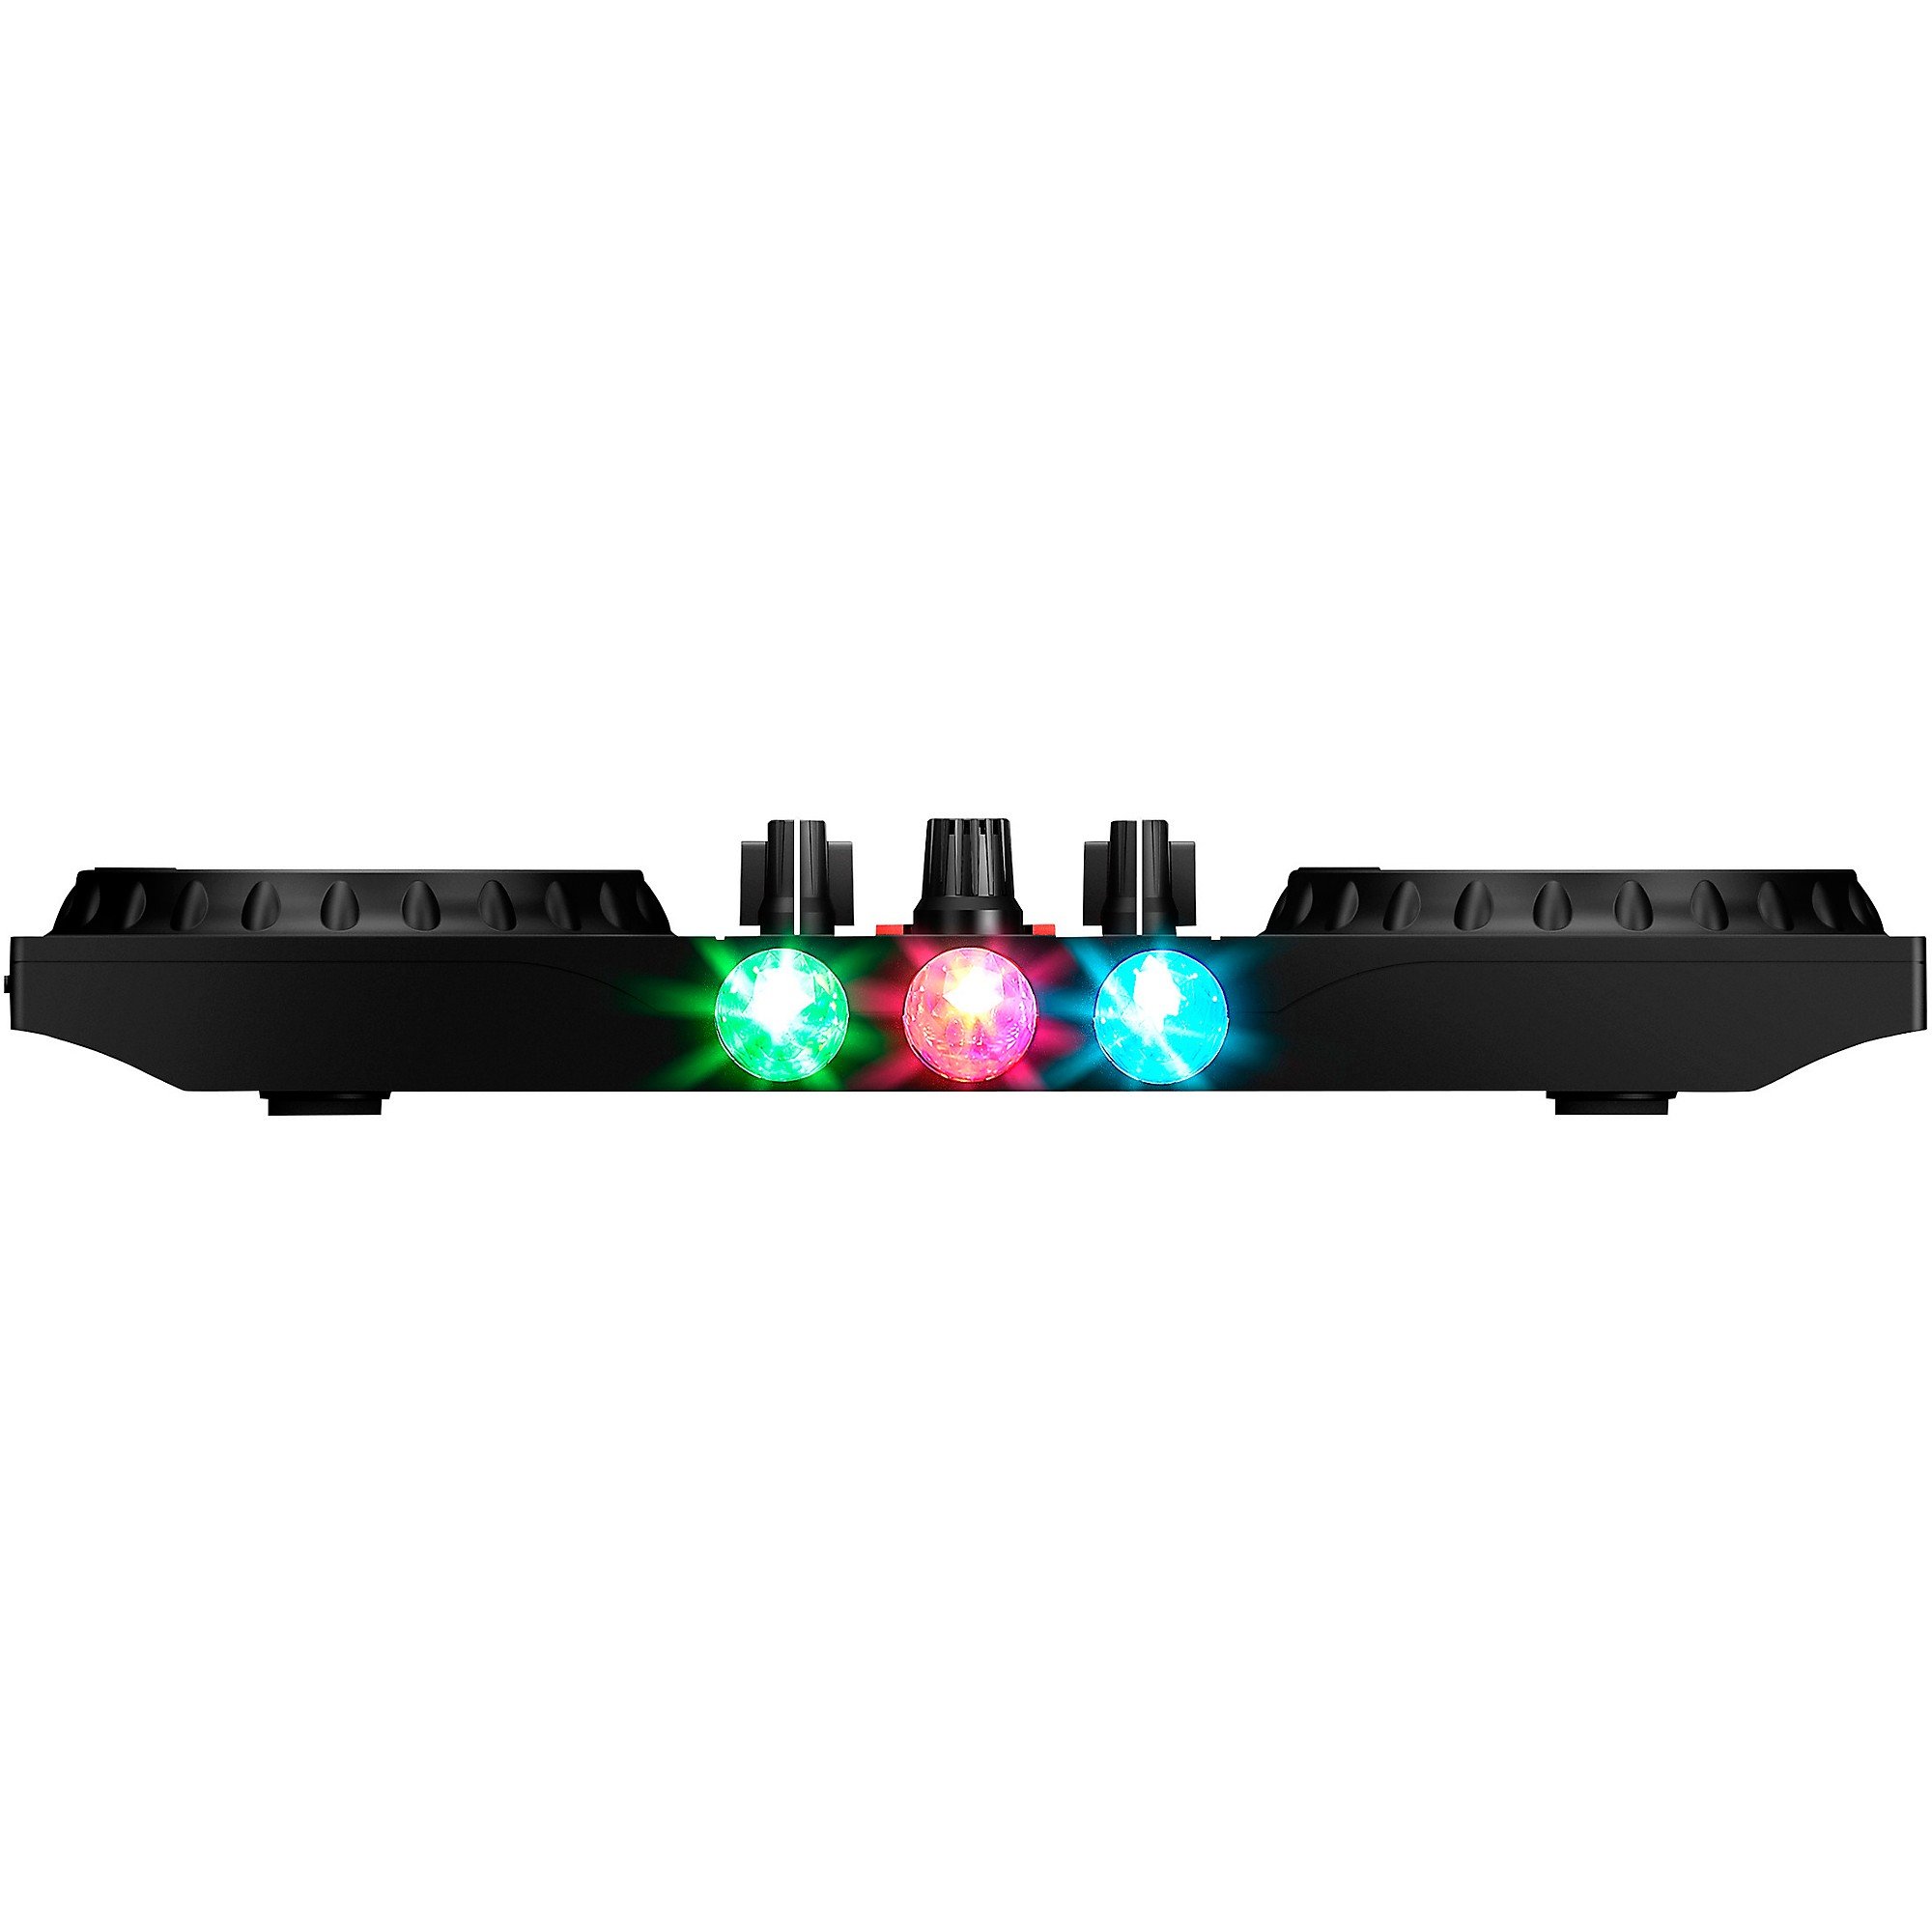 Numark Beginners Party Mix II - DJ Controller Set with Built-In Lights, Mixer for Serato Lite and Algoriddim Pro AI - image 3 of 8